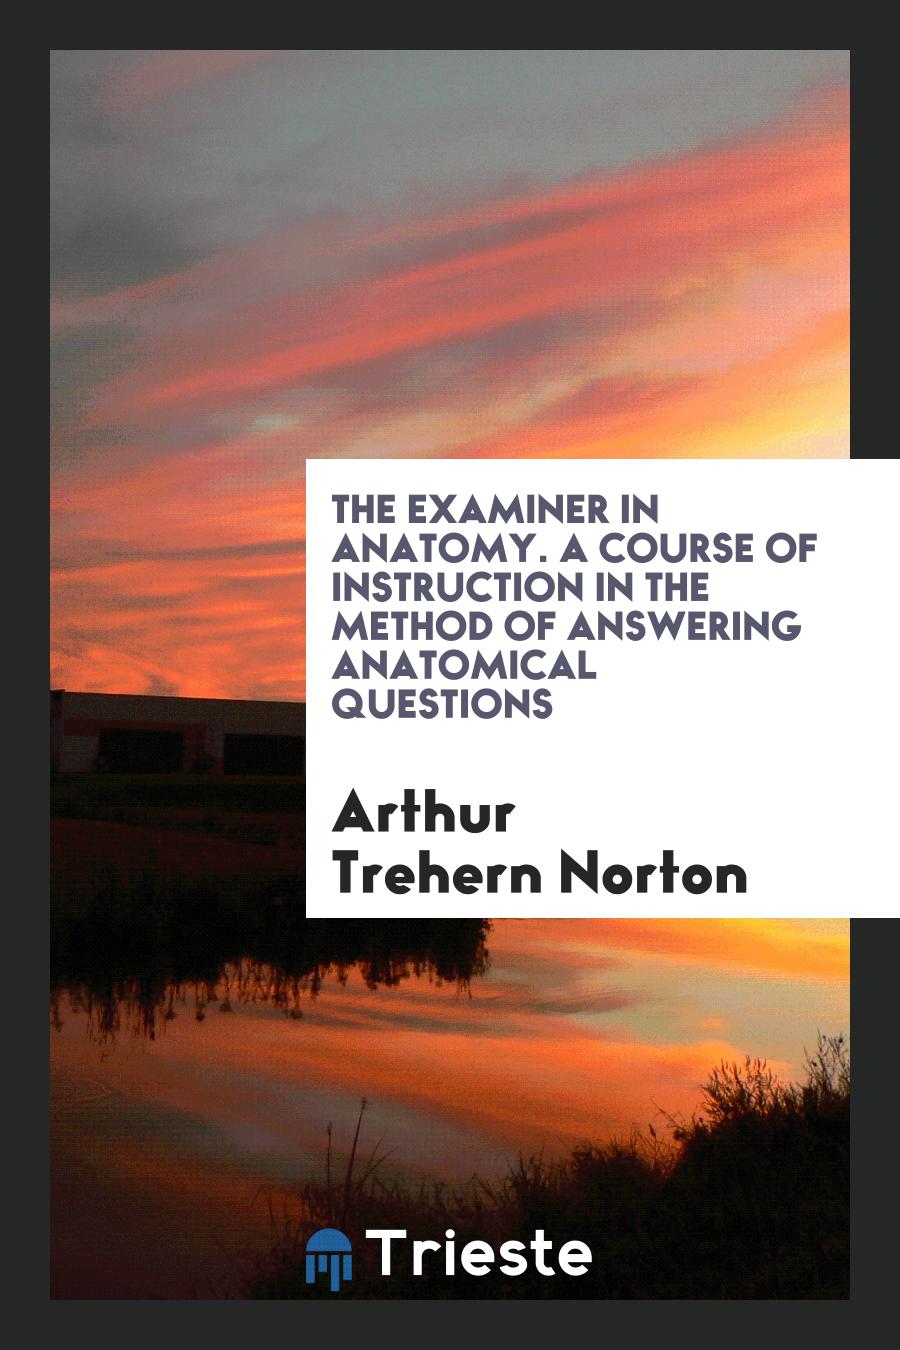 The Examiner in Anatomy. A Course of Instruction in the Method of Answering Anatomical Questions